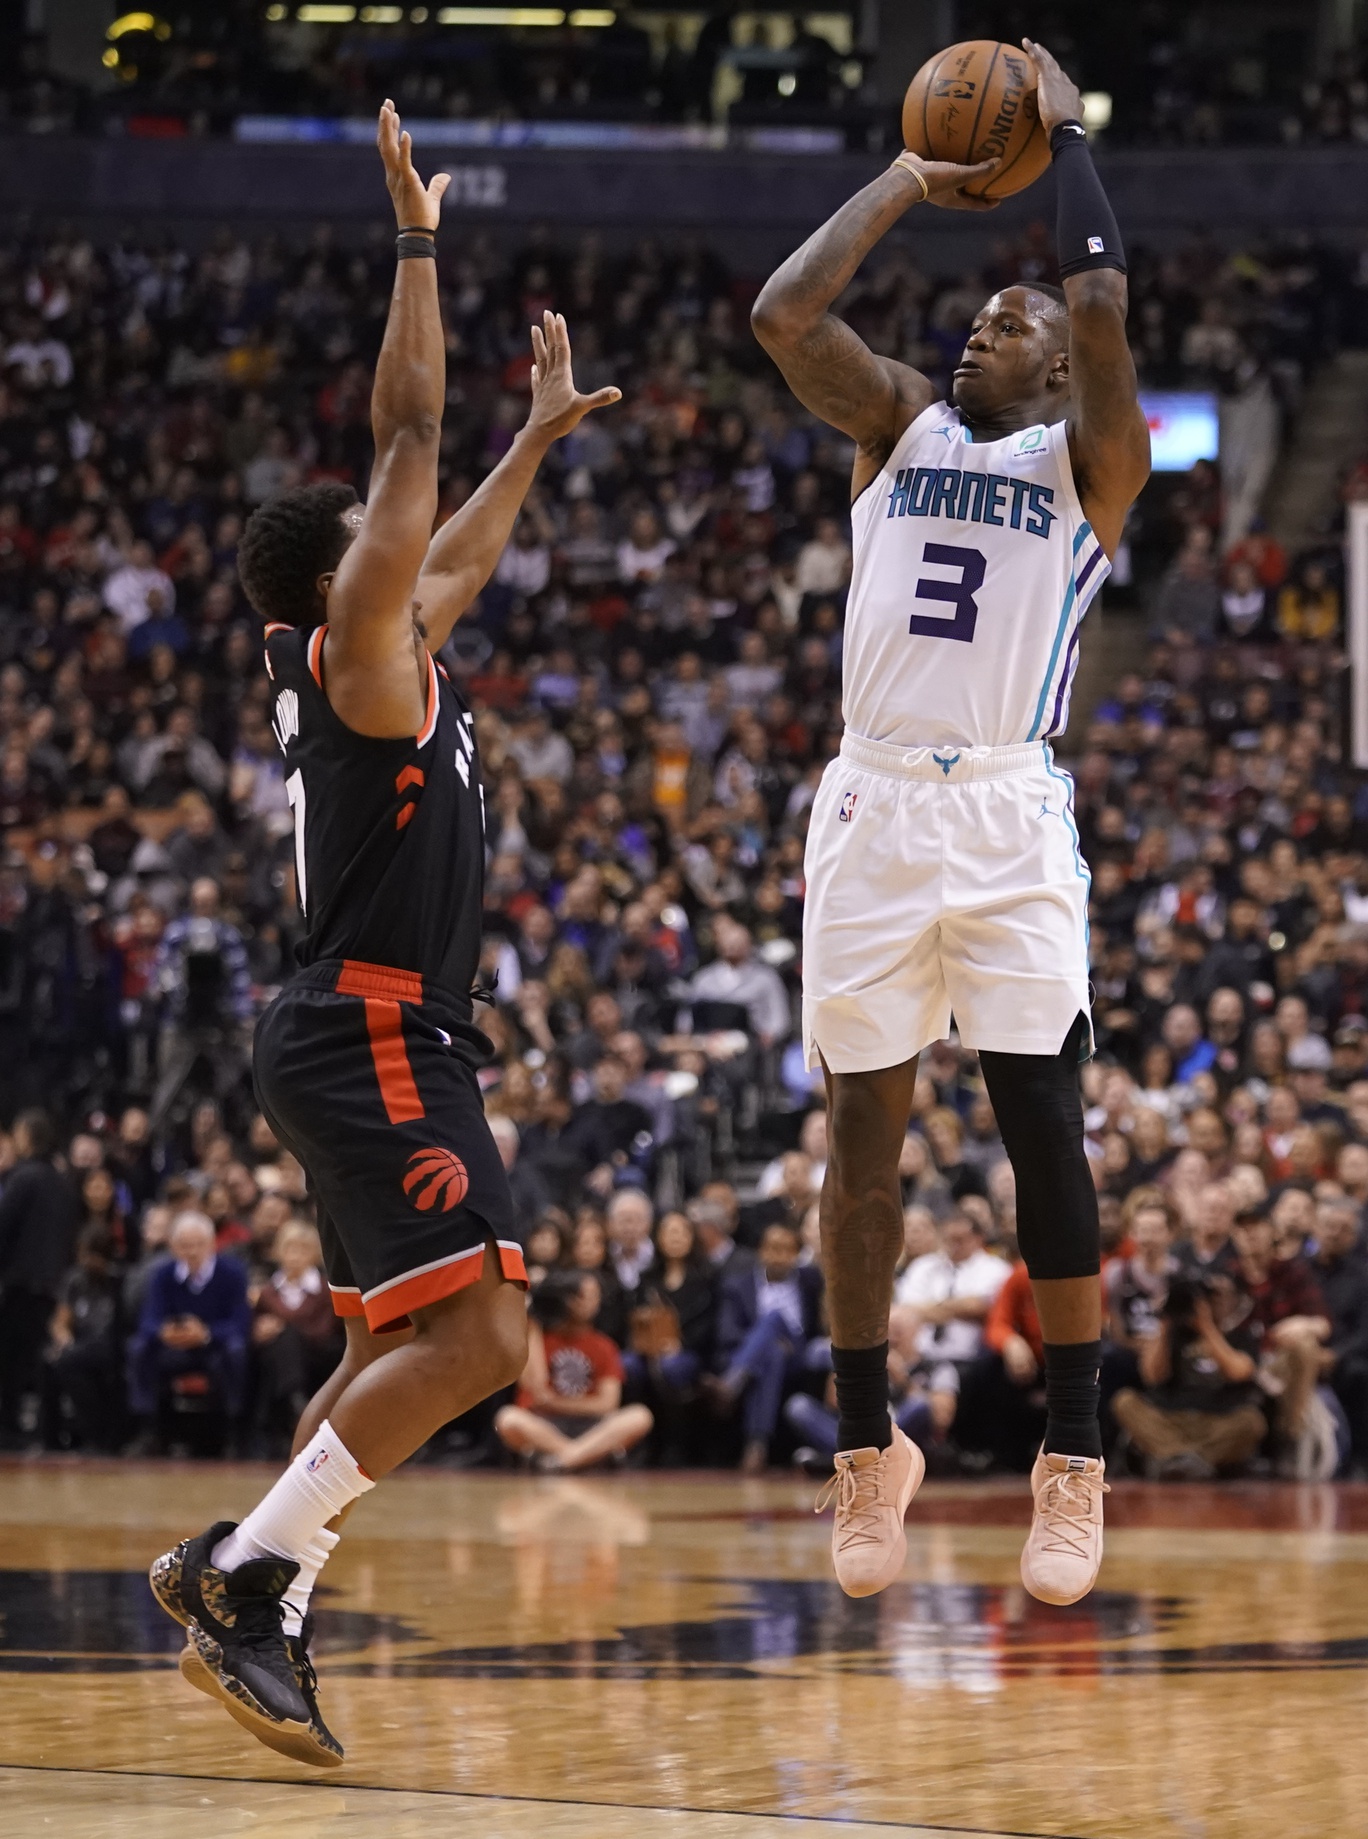 Charlotte Hornets guard Terry Rozier (3) makes a basket against Toronto Raptors guard Kyle Lowry (7) during the first half at Scotiabank Arena.